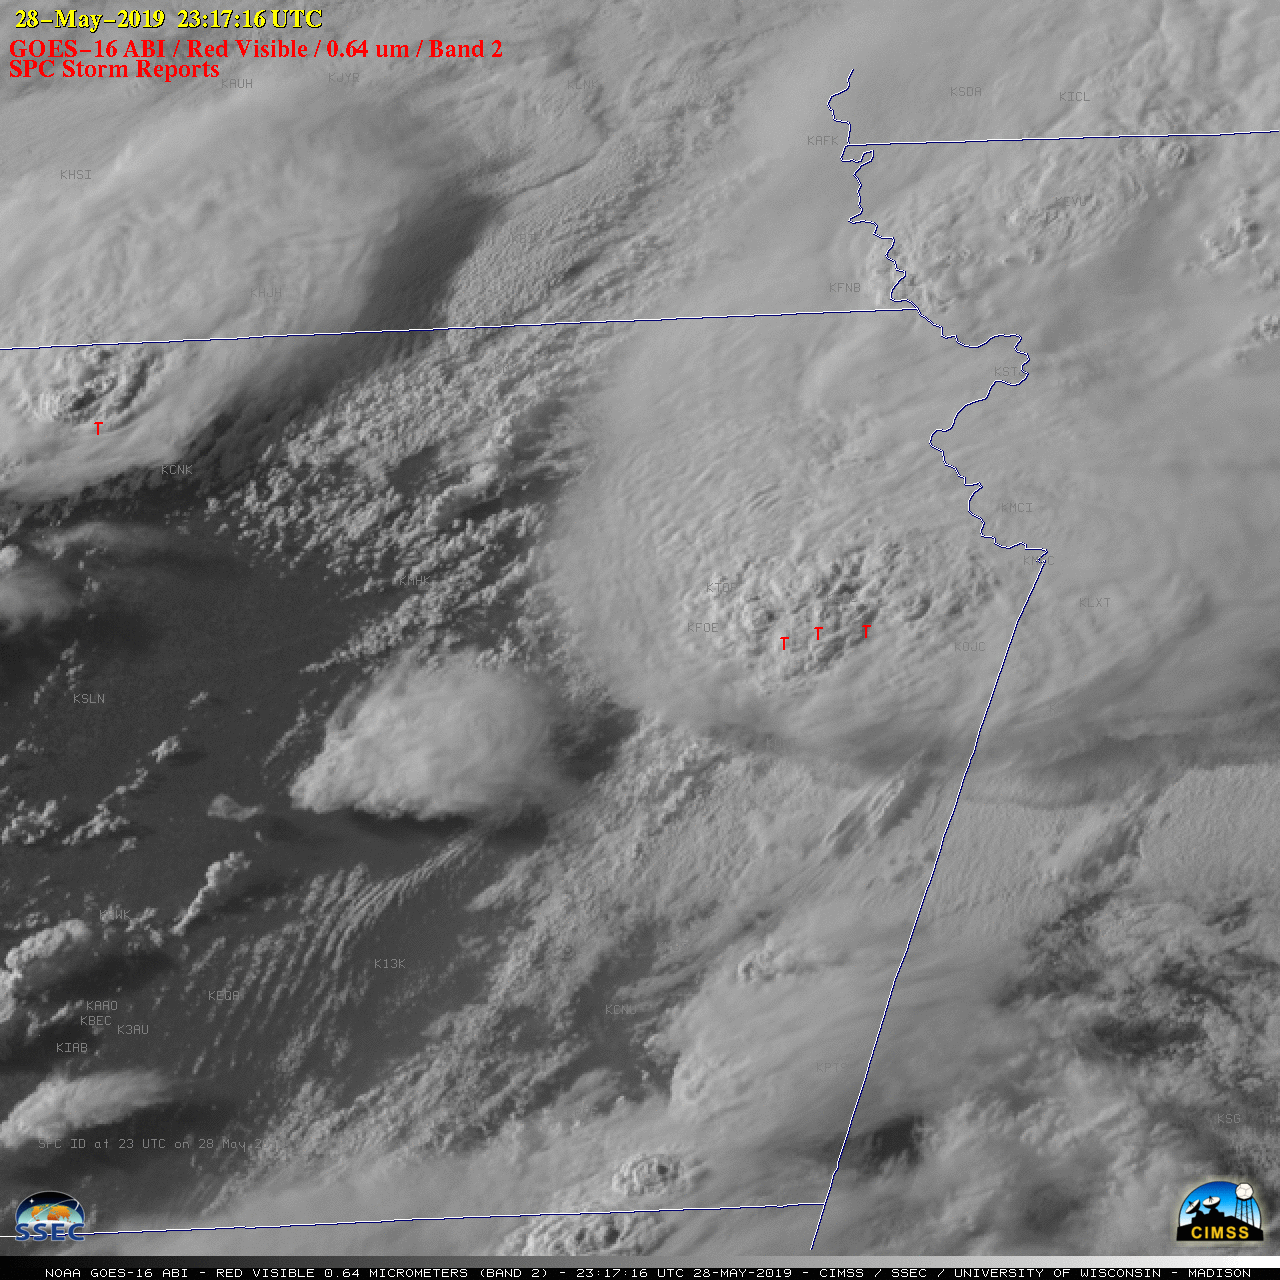 GOES-16 “Red” Visible (0.64 µm) images, with SPC Storm Reports plotted in red [click to play MP4 animation]